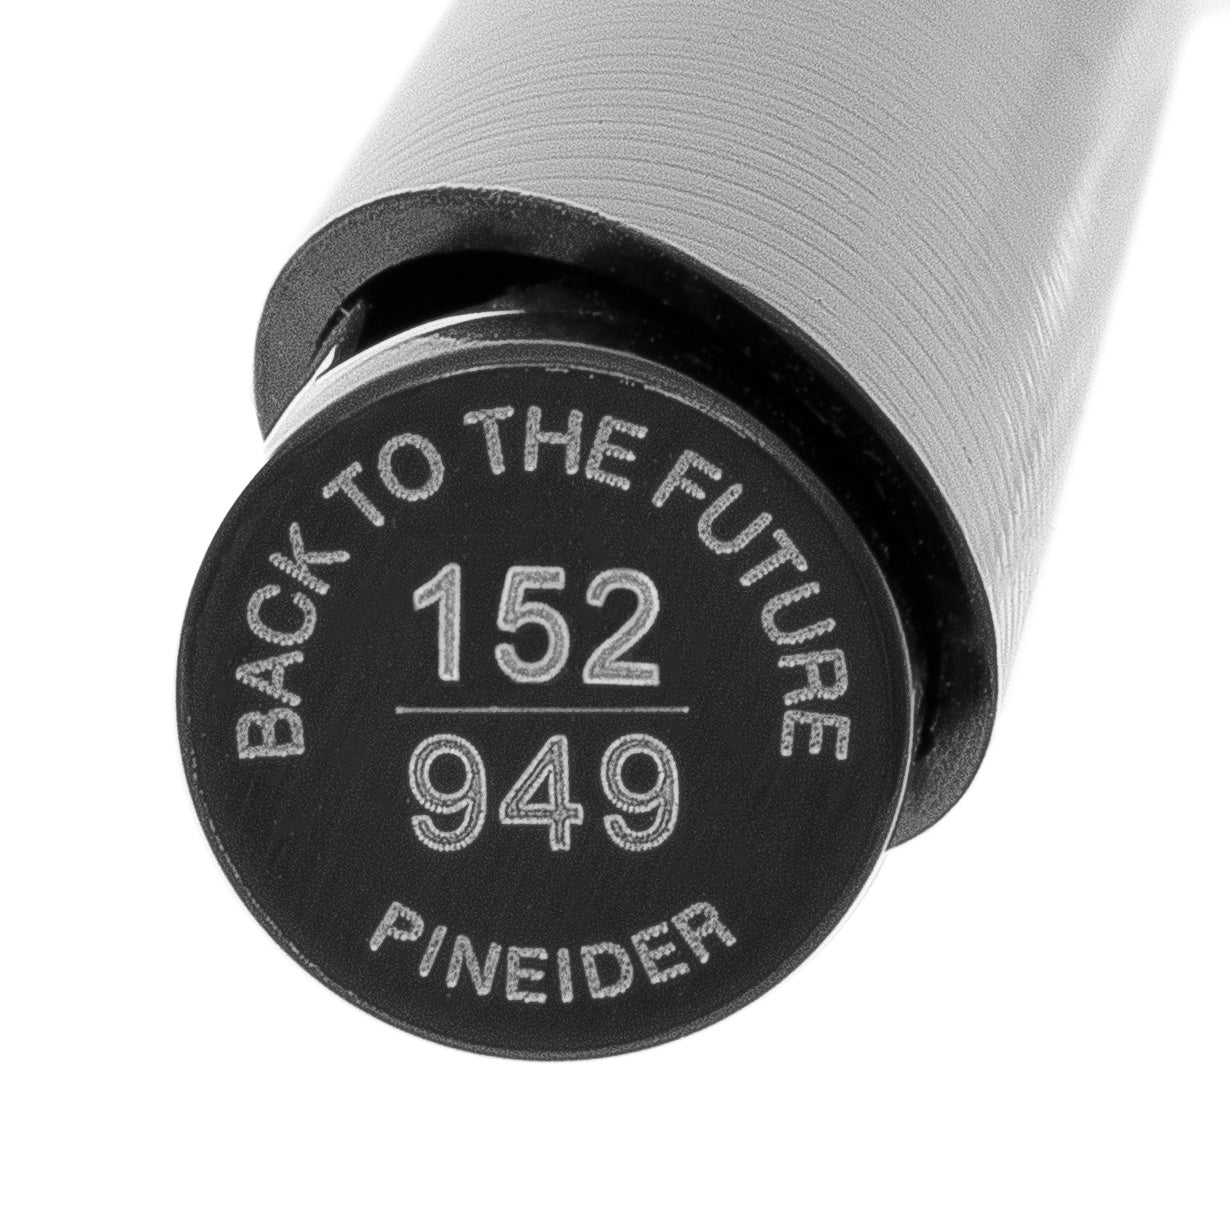 Pineider Back to the Future Rollerball Pen (Limited Edition)